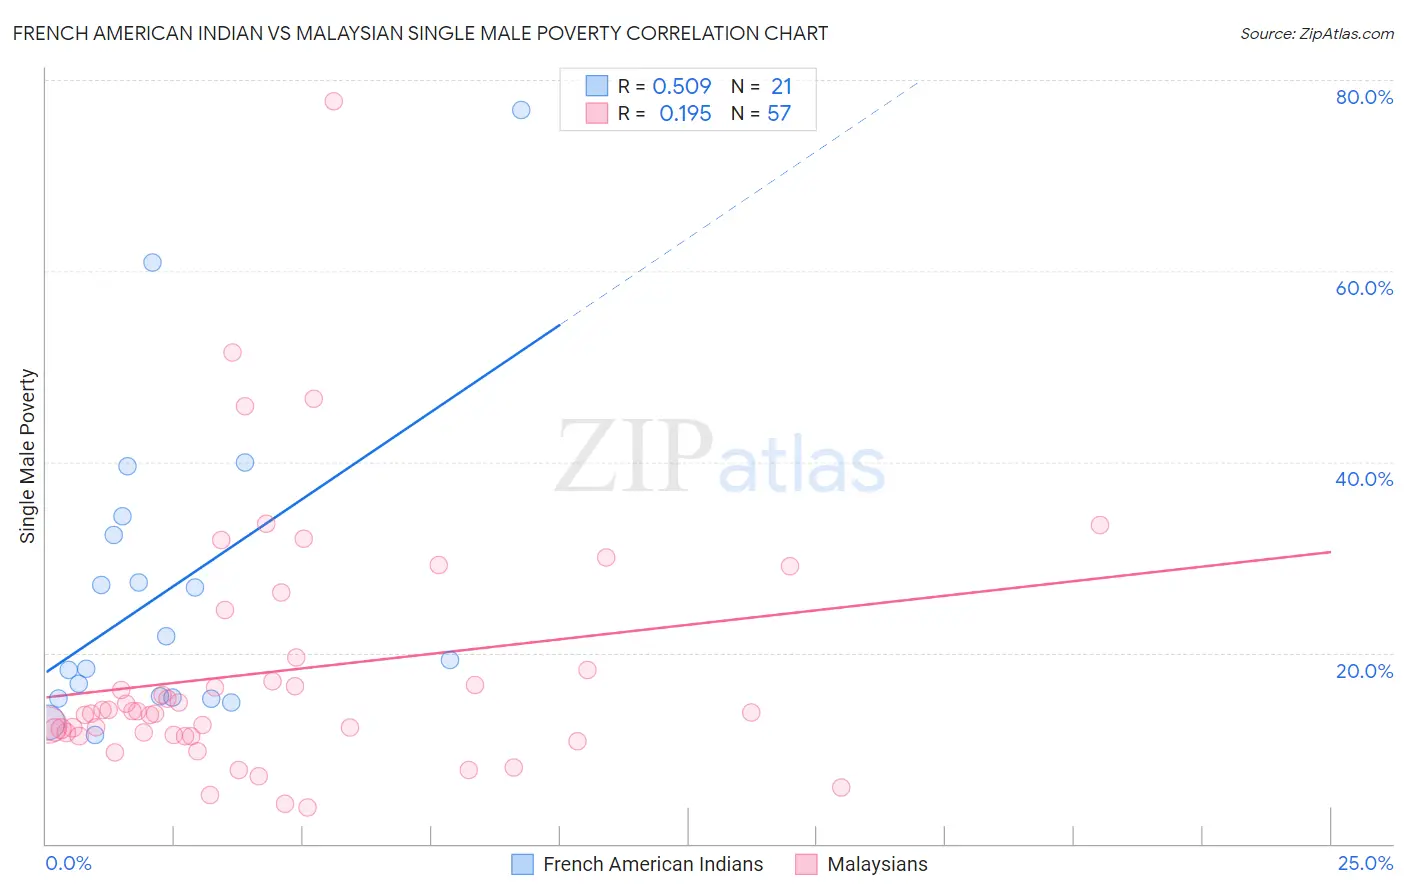 French American Indian vs Malaysian Single Male Poverty